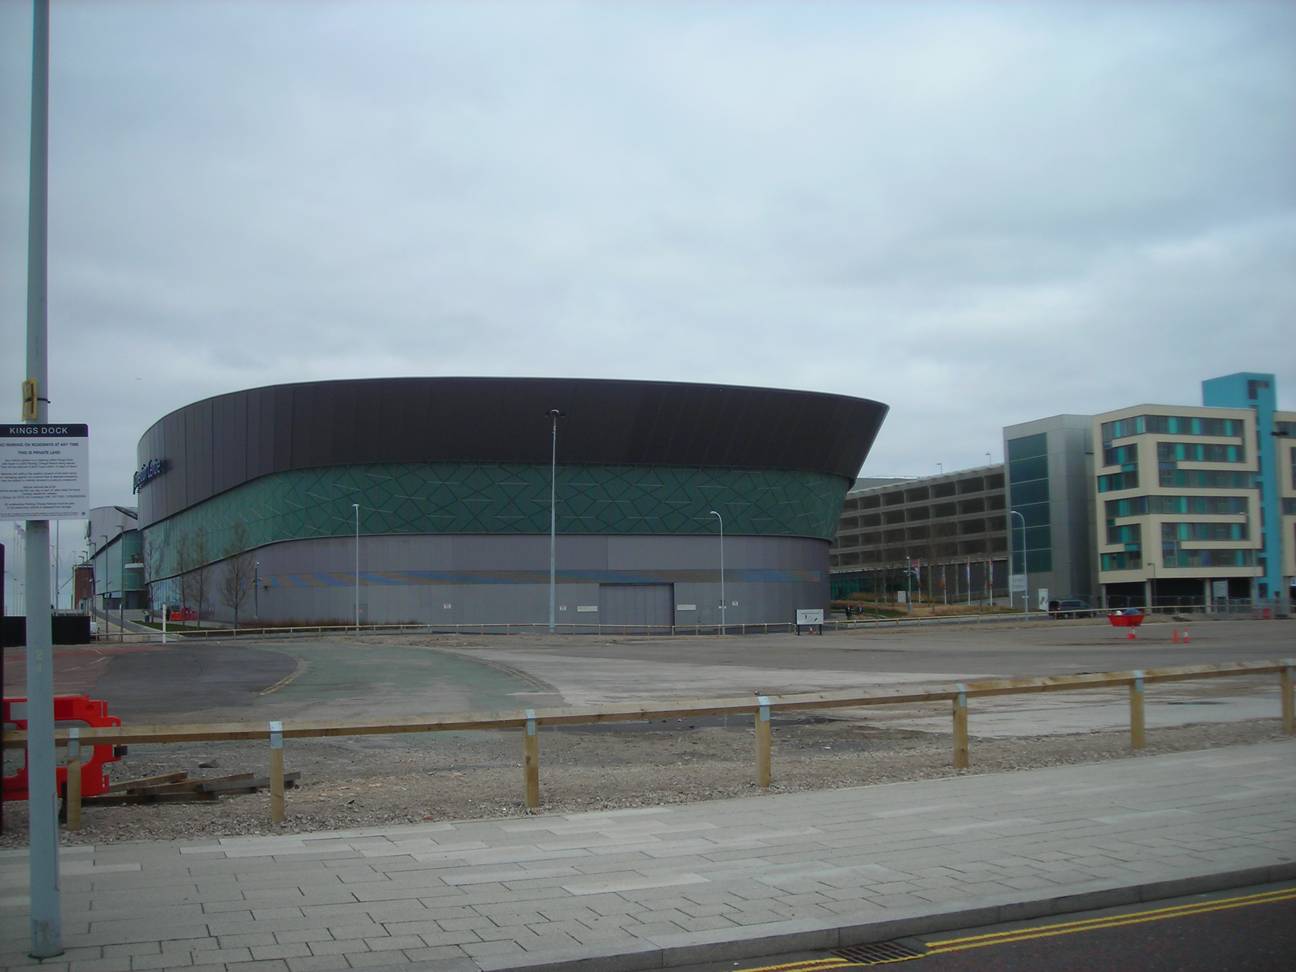 Site of ACC Liverpool exhibition and events complex